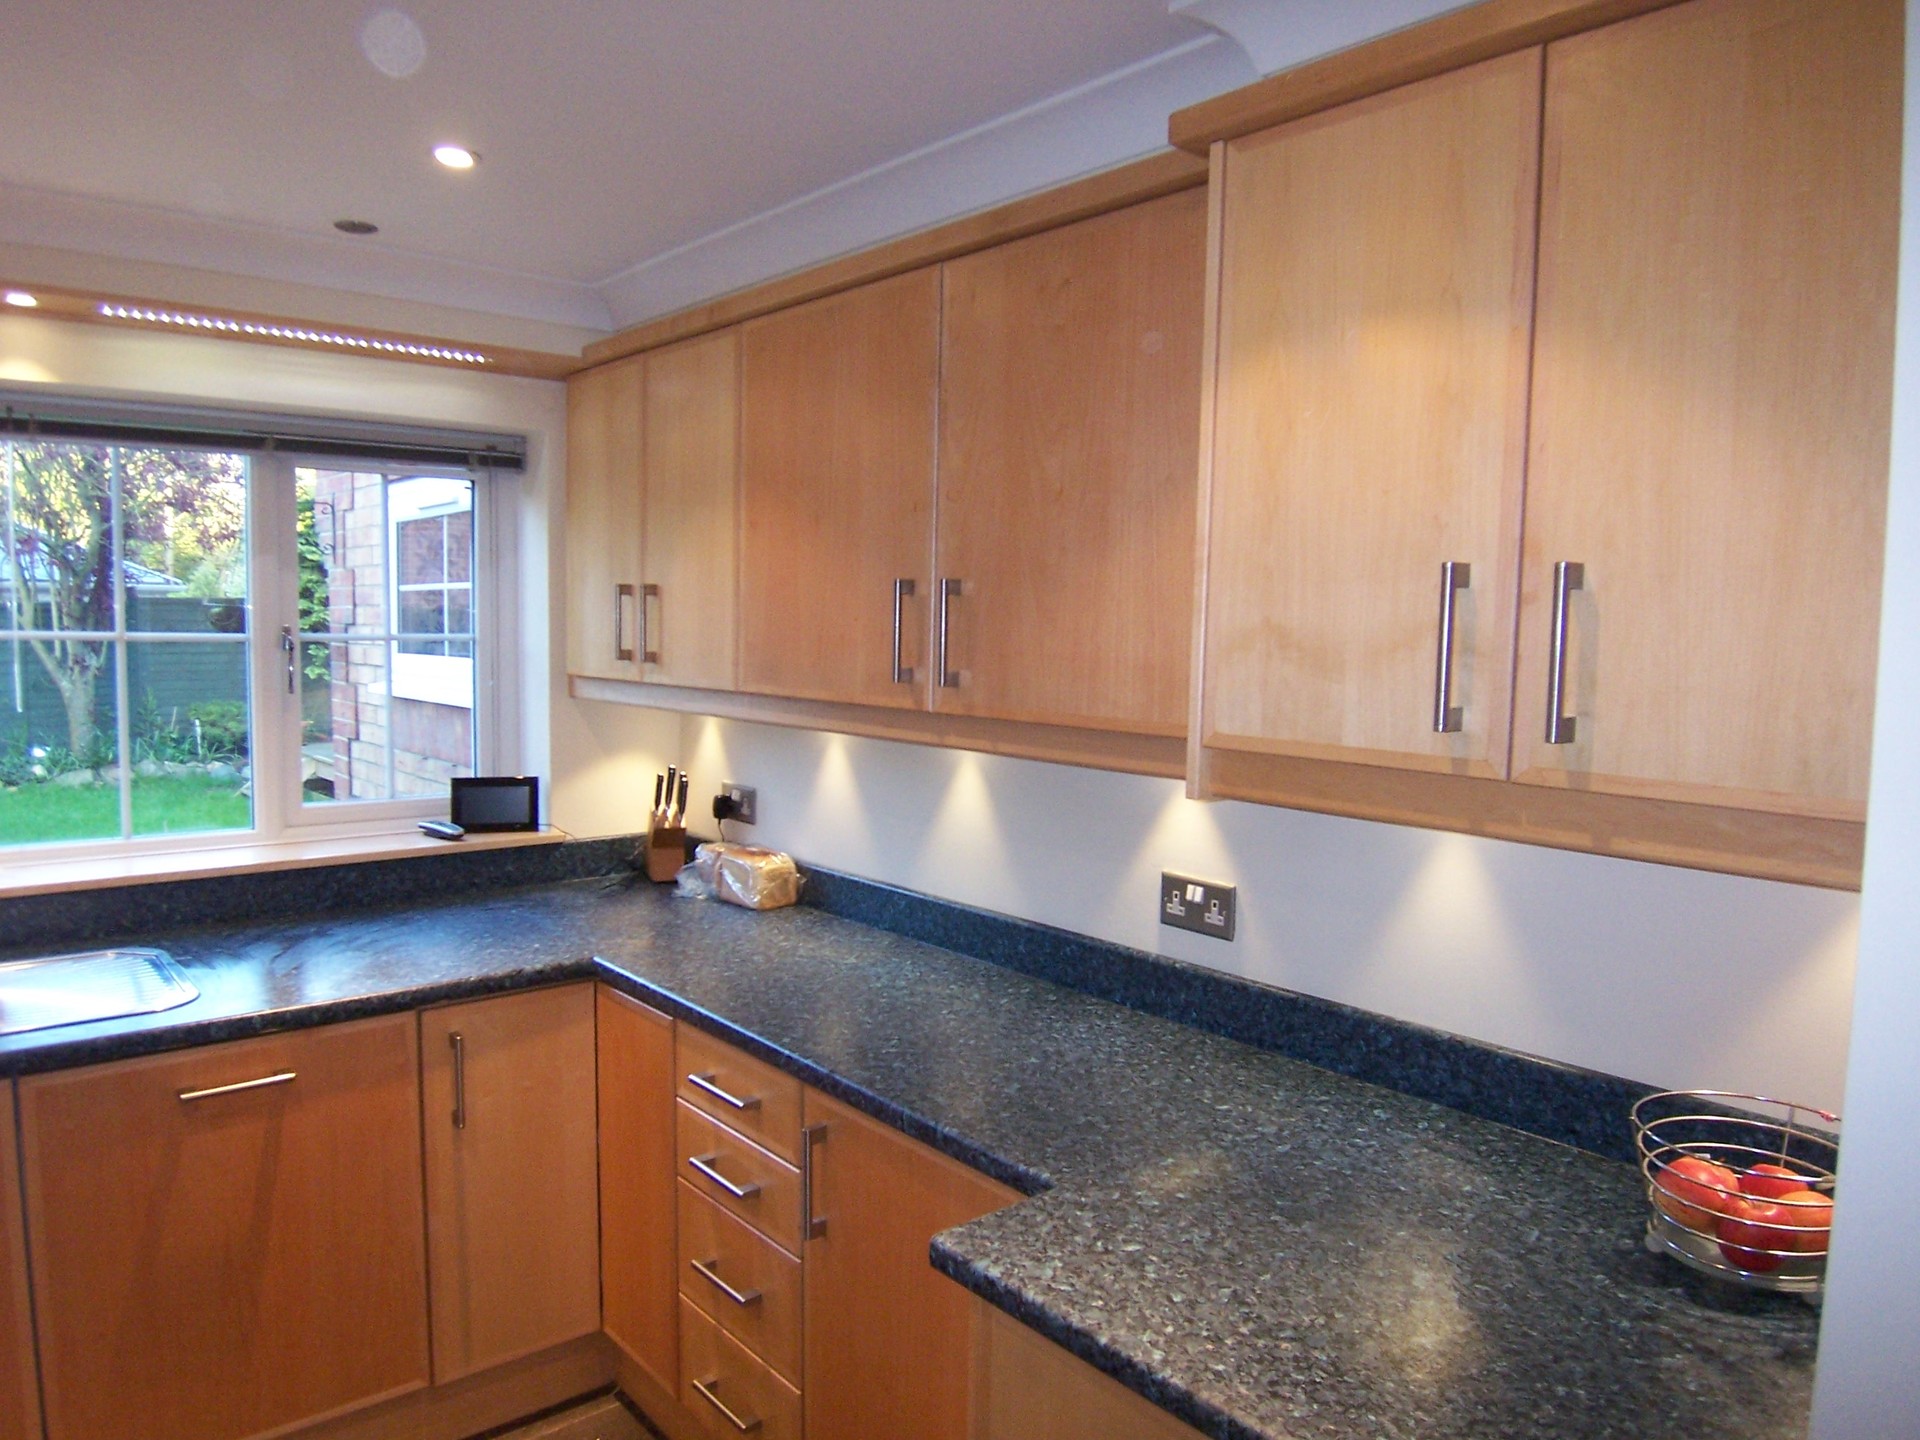 Existing kitchen, Bicester